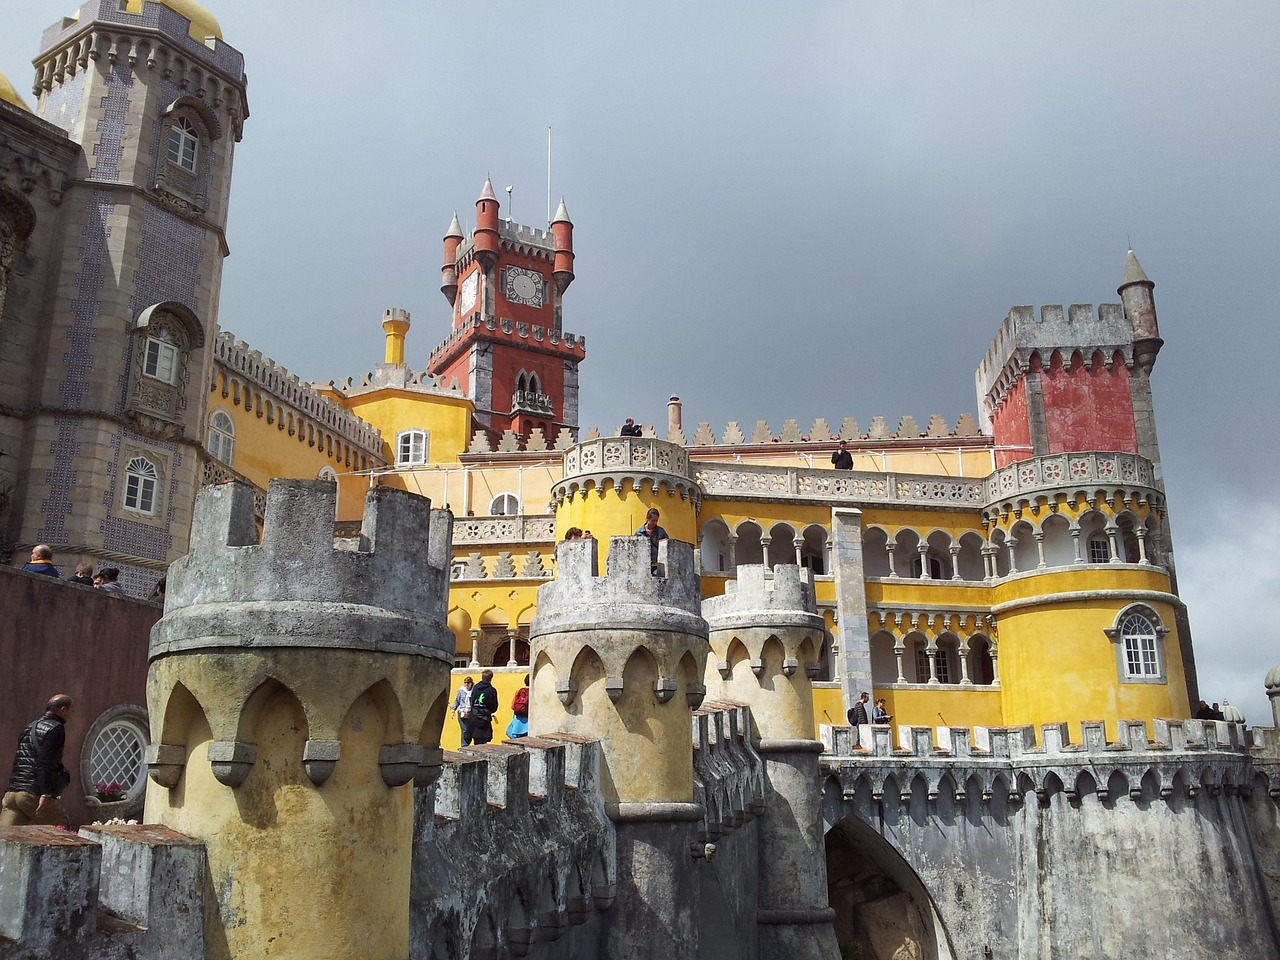 The National Palace of Sintra